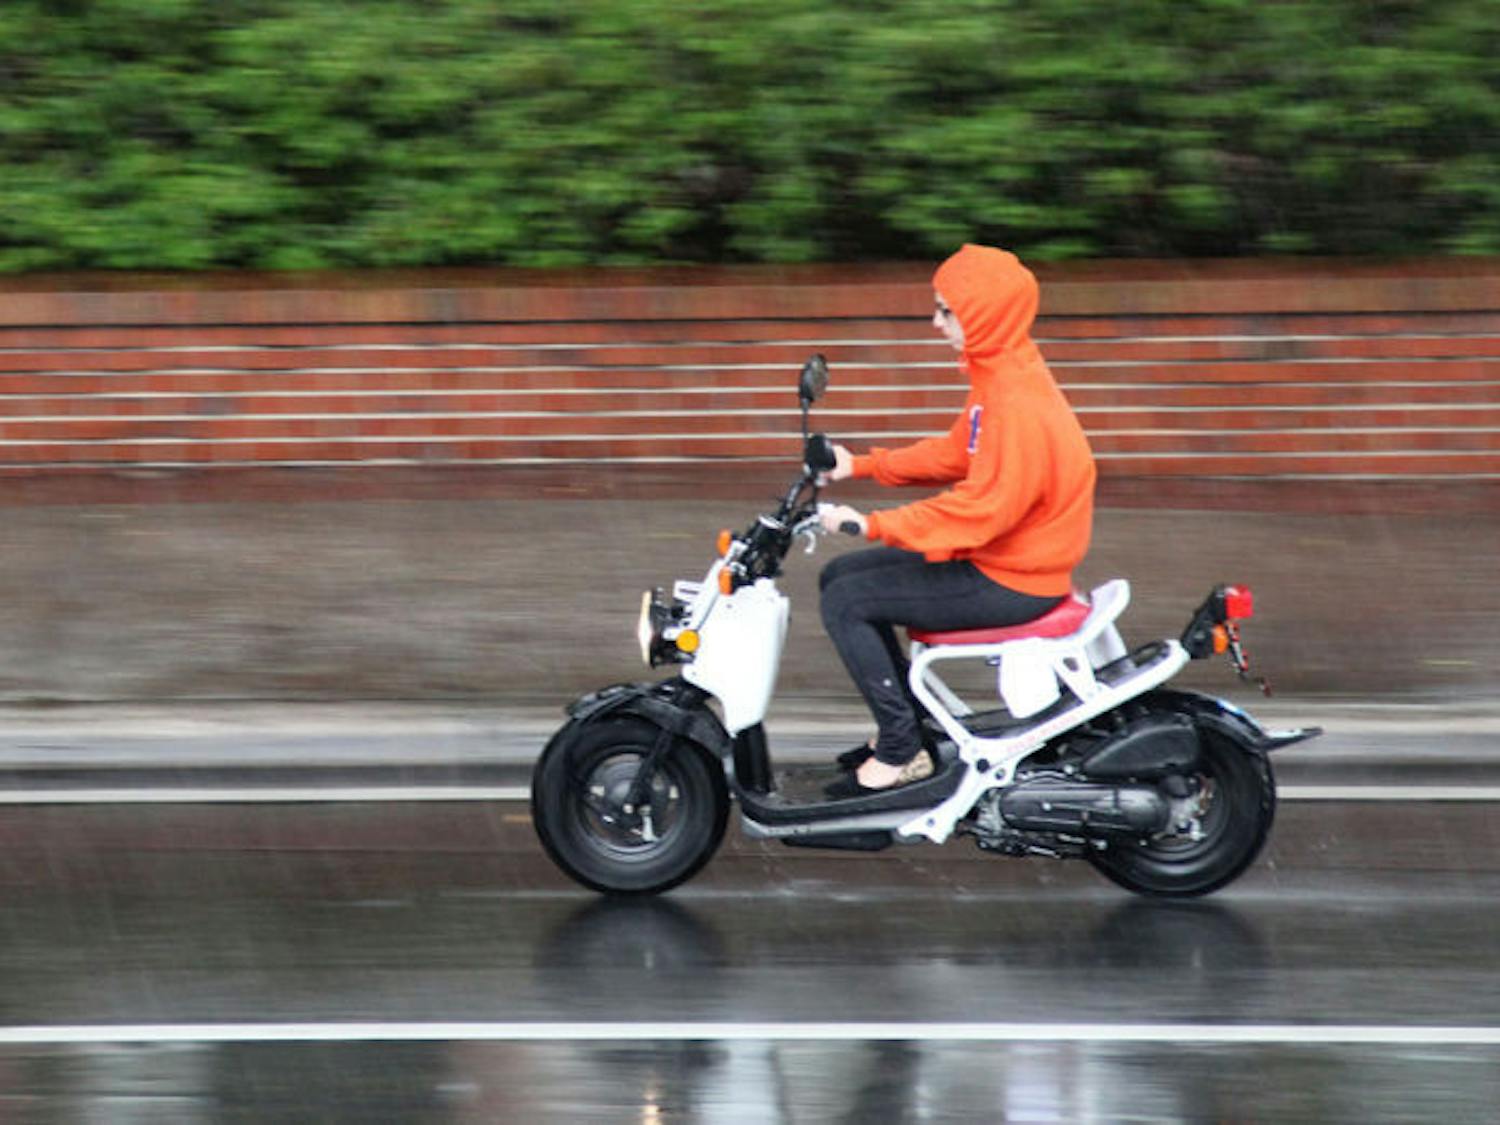 A student rides to UF's campus in the rain Tuesday morning on University Avenue. The early-morning rain could bring cooler temperatures for the upcoming days.